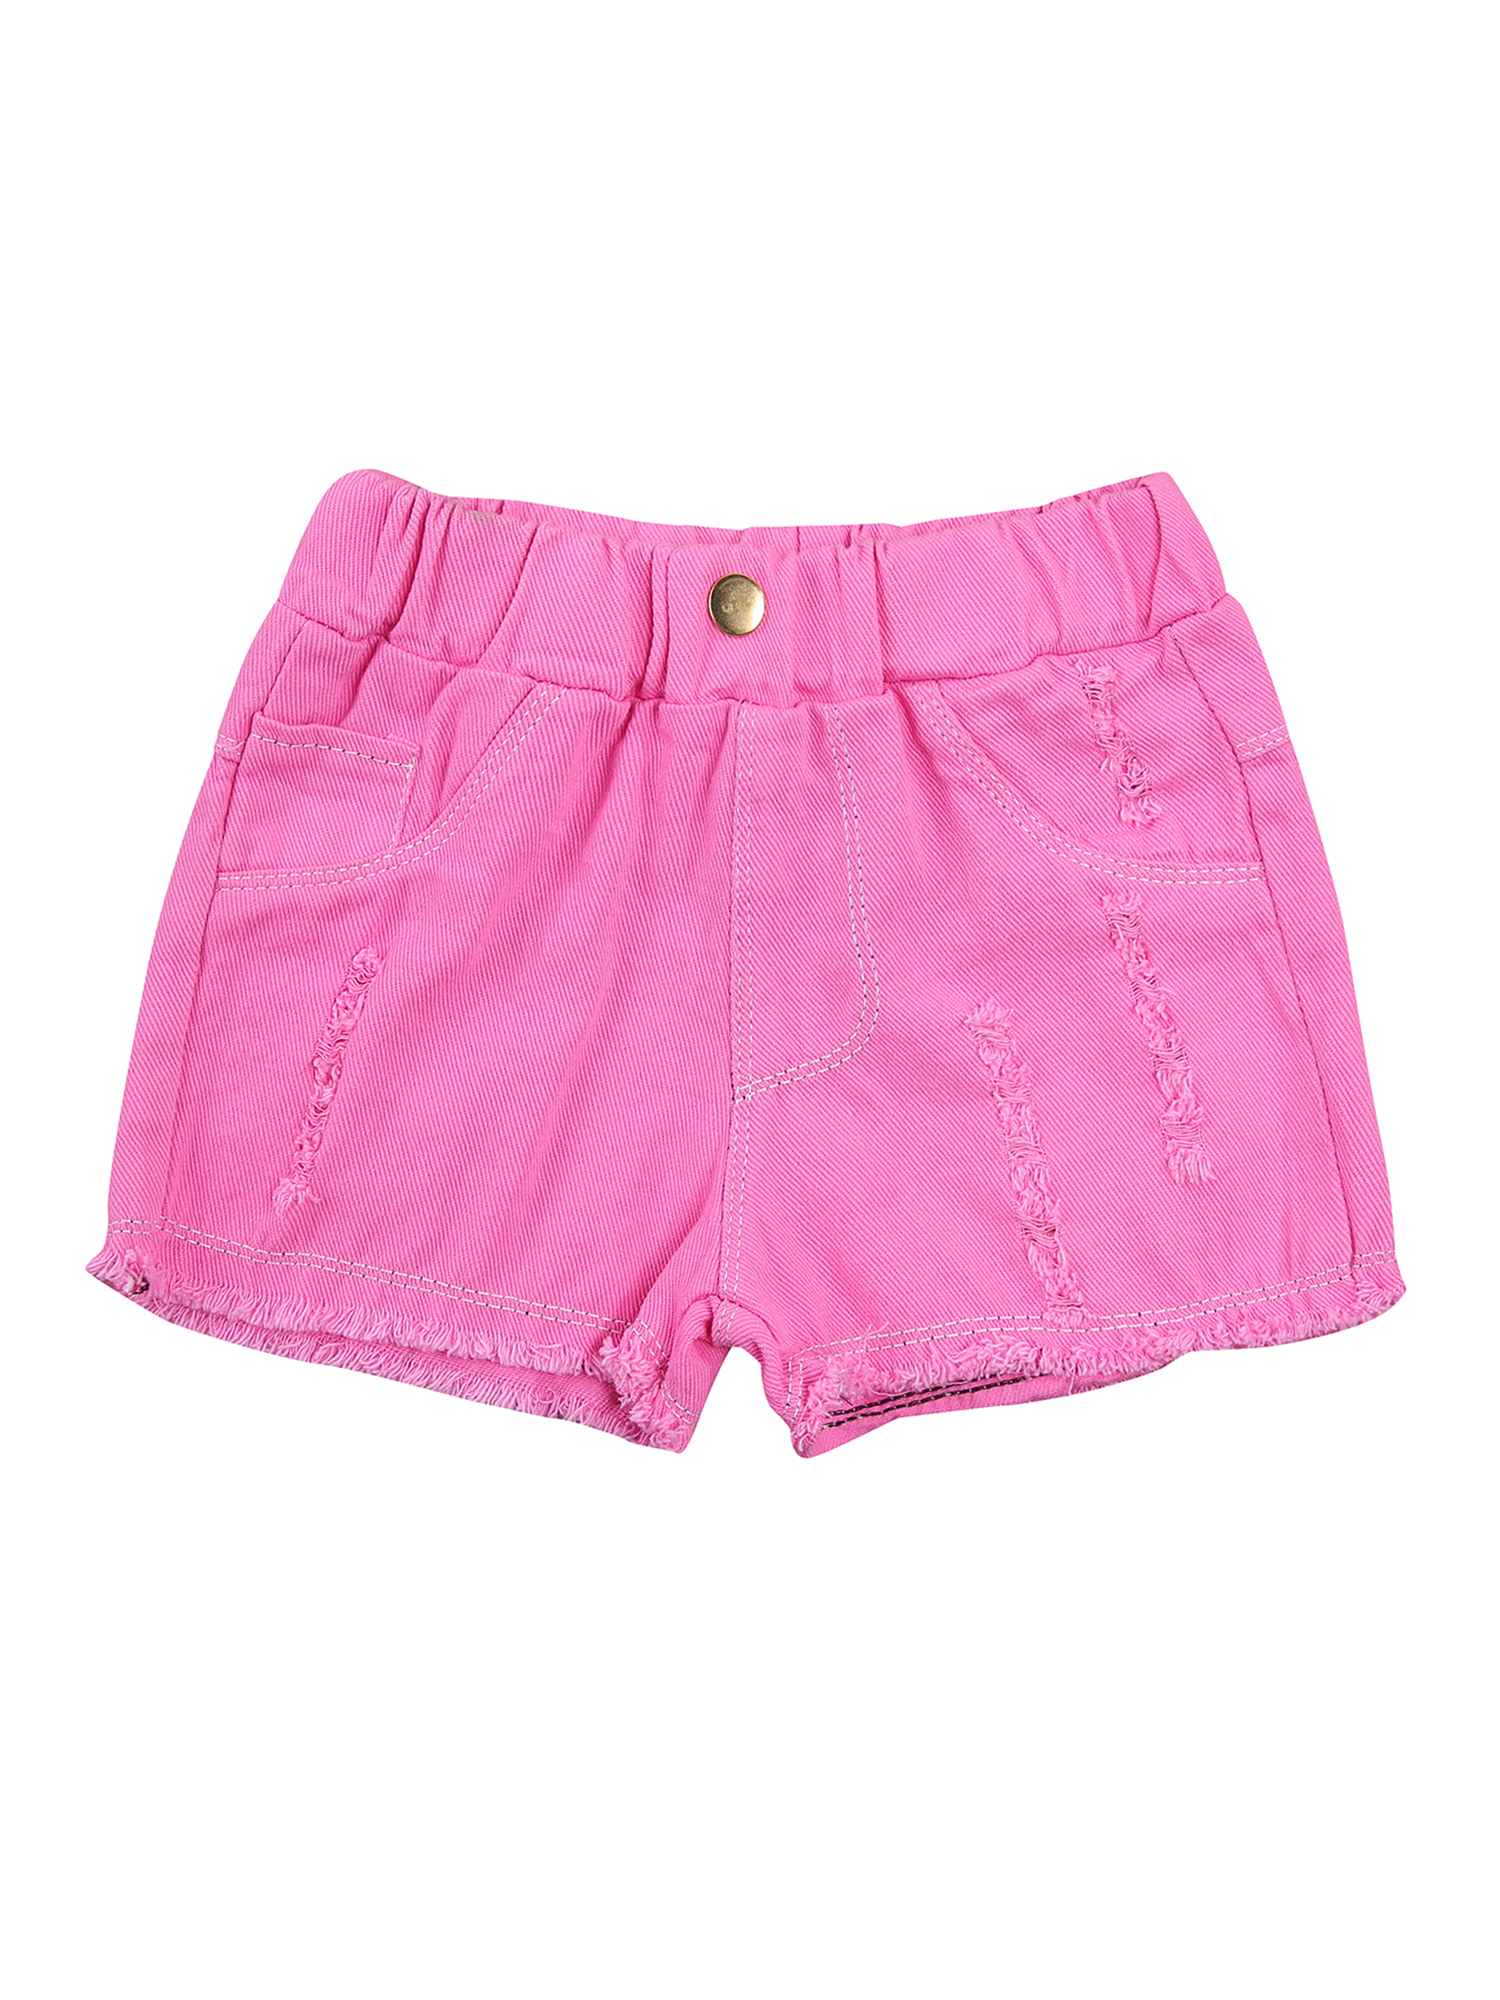 Eyicmarn Little Girls Ripped Denim Shorts, Solid Color High Elastic Waist Jeans Short Pants - image 1 of 6